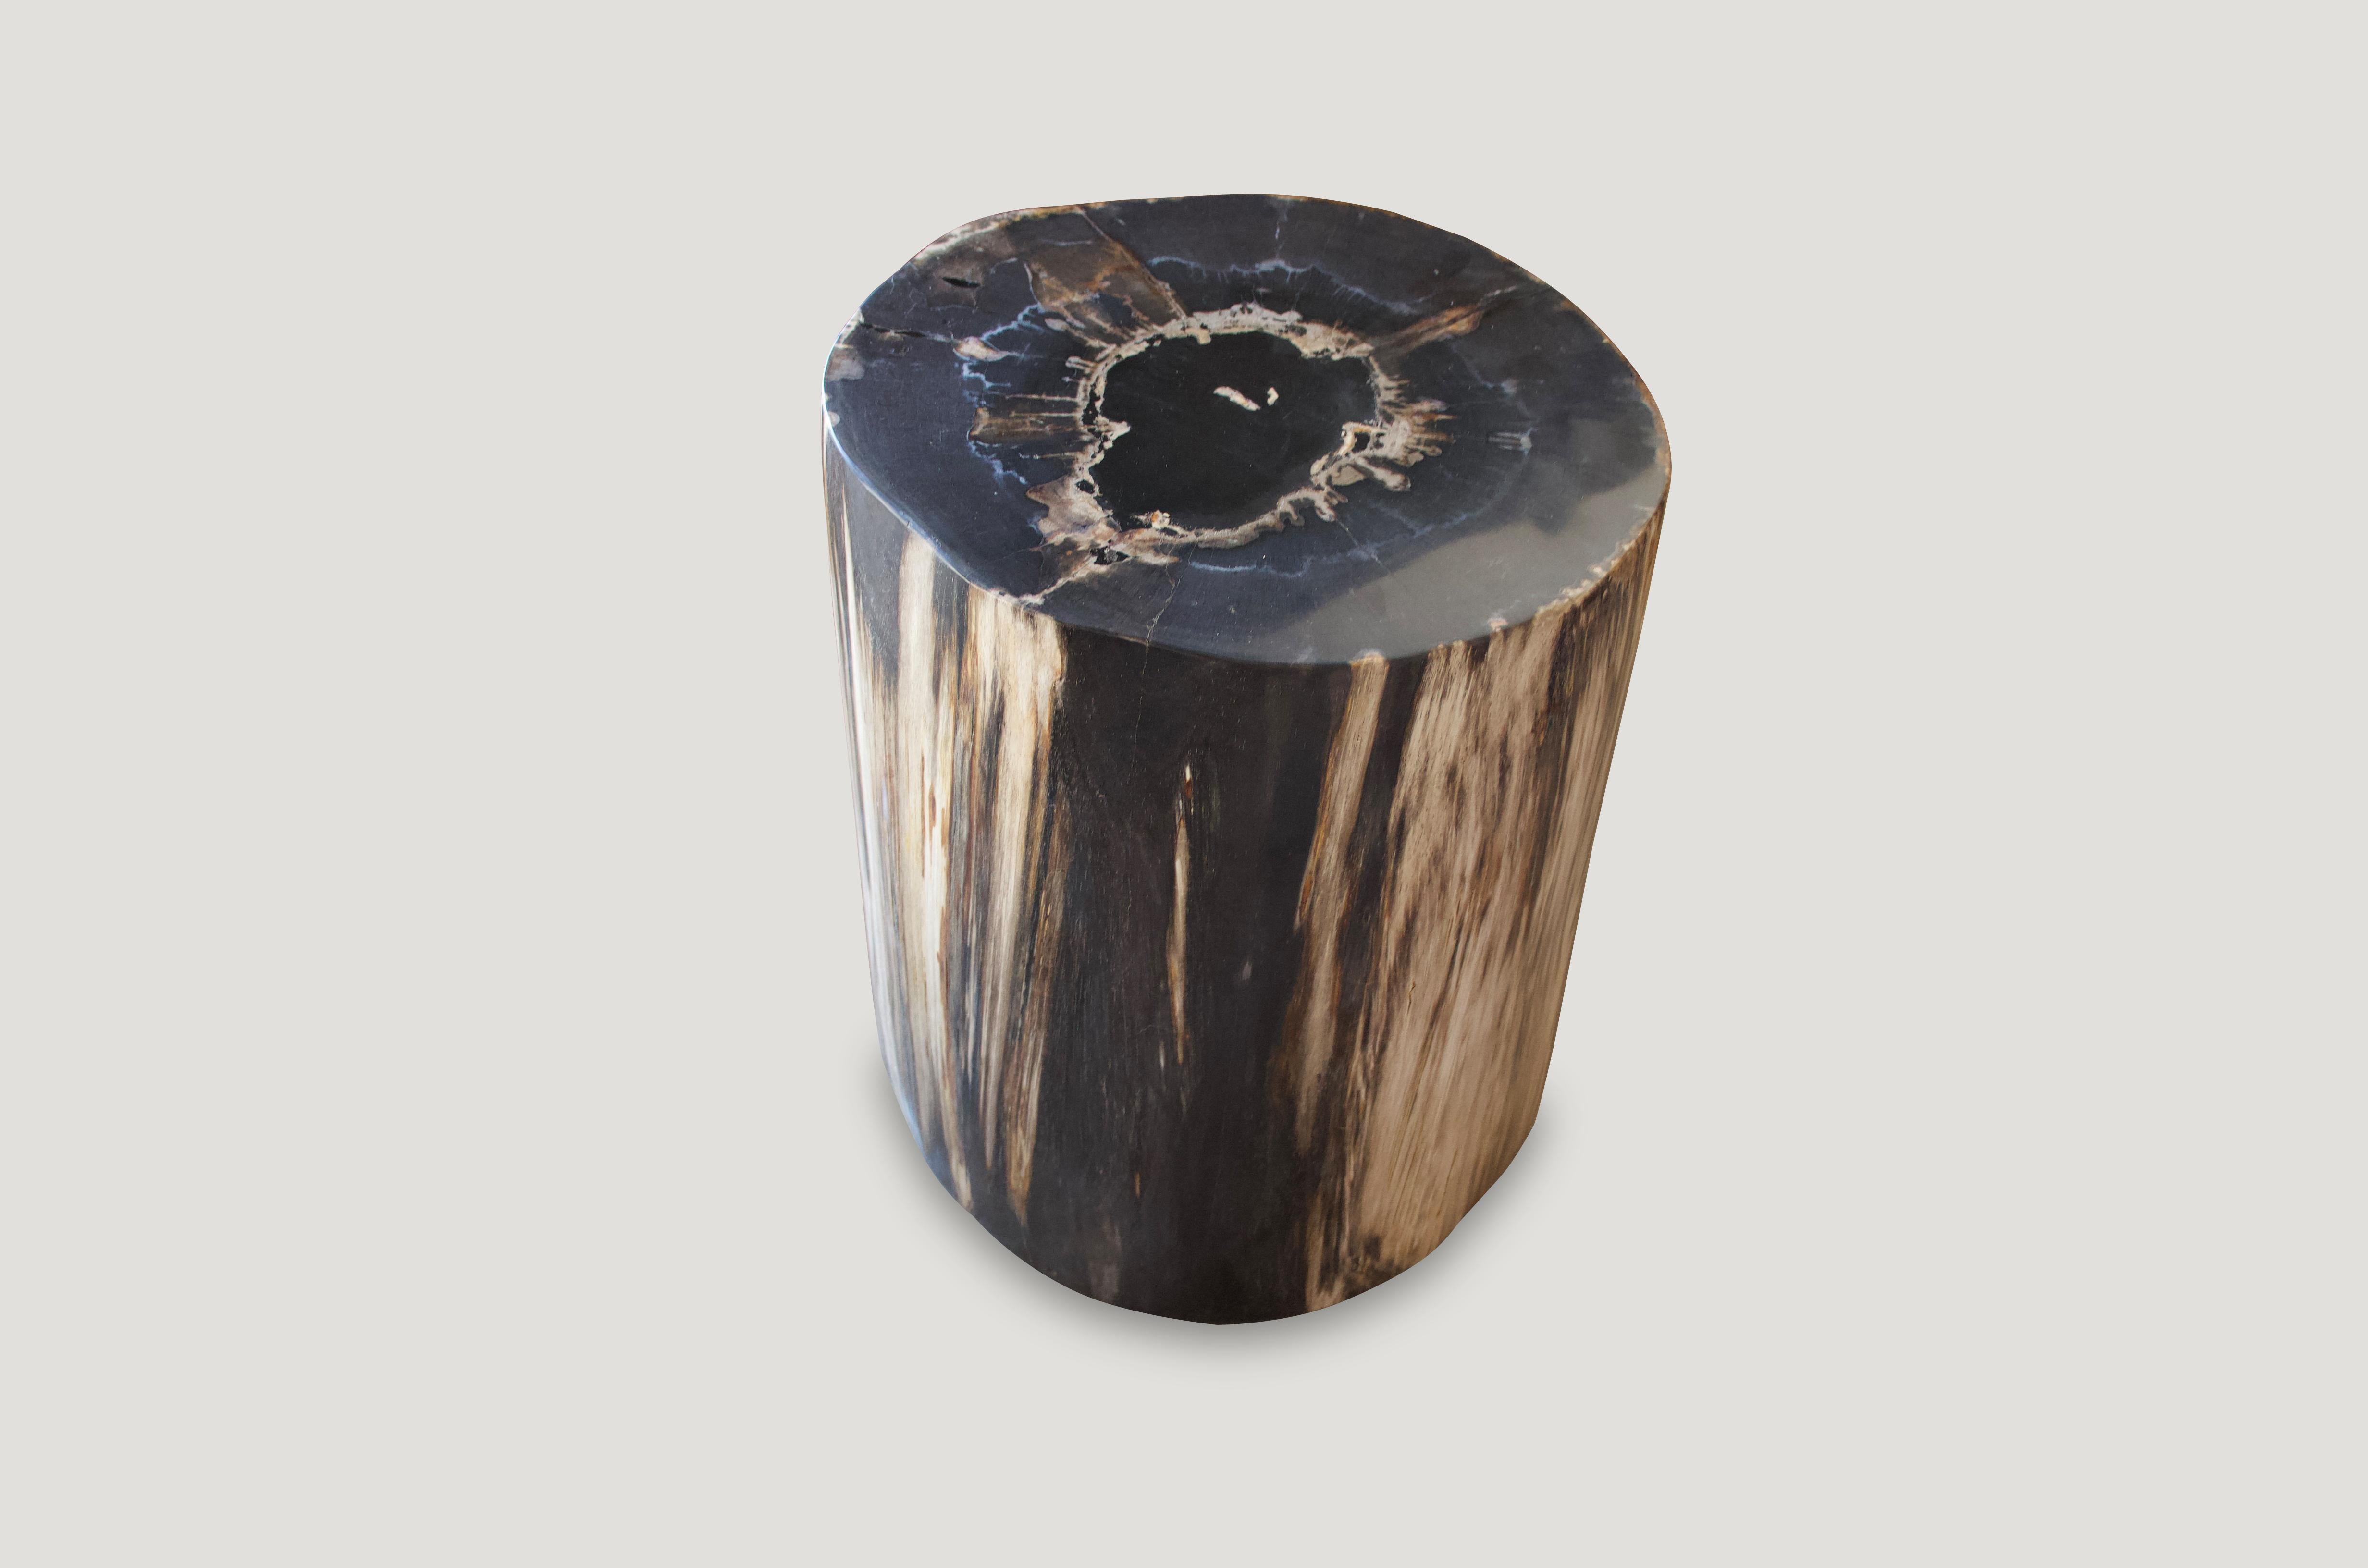 Stunning, contrasting tones on this super smooth, high quality petrified wood side table. We have a collection of five all cut from the same petrified log. The price reflects one.

As with a diamond, we polish the highest quality fossilized